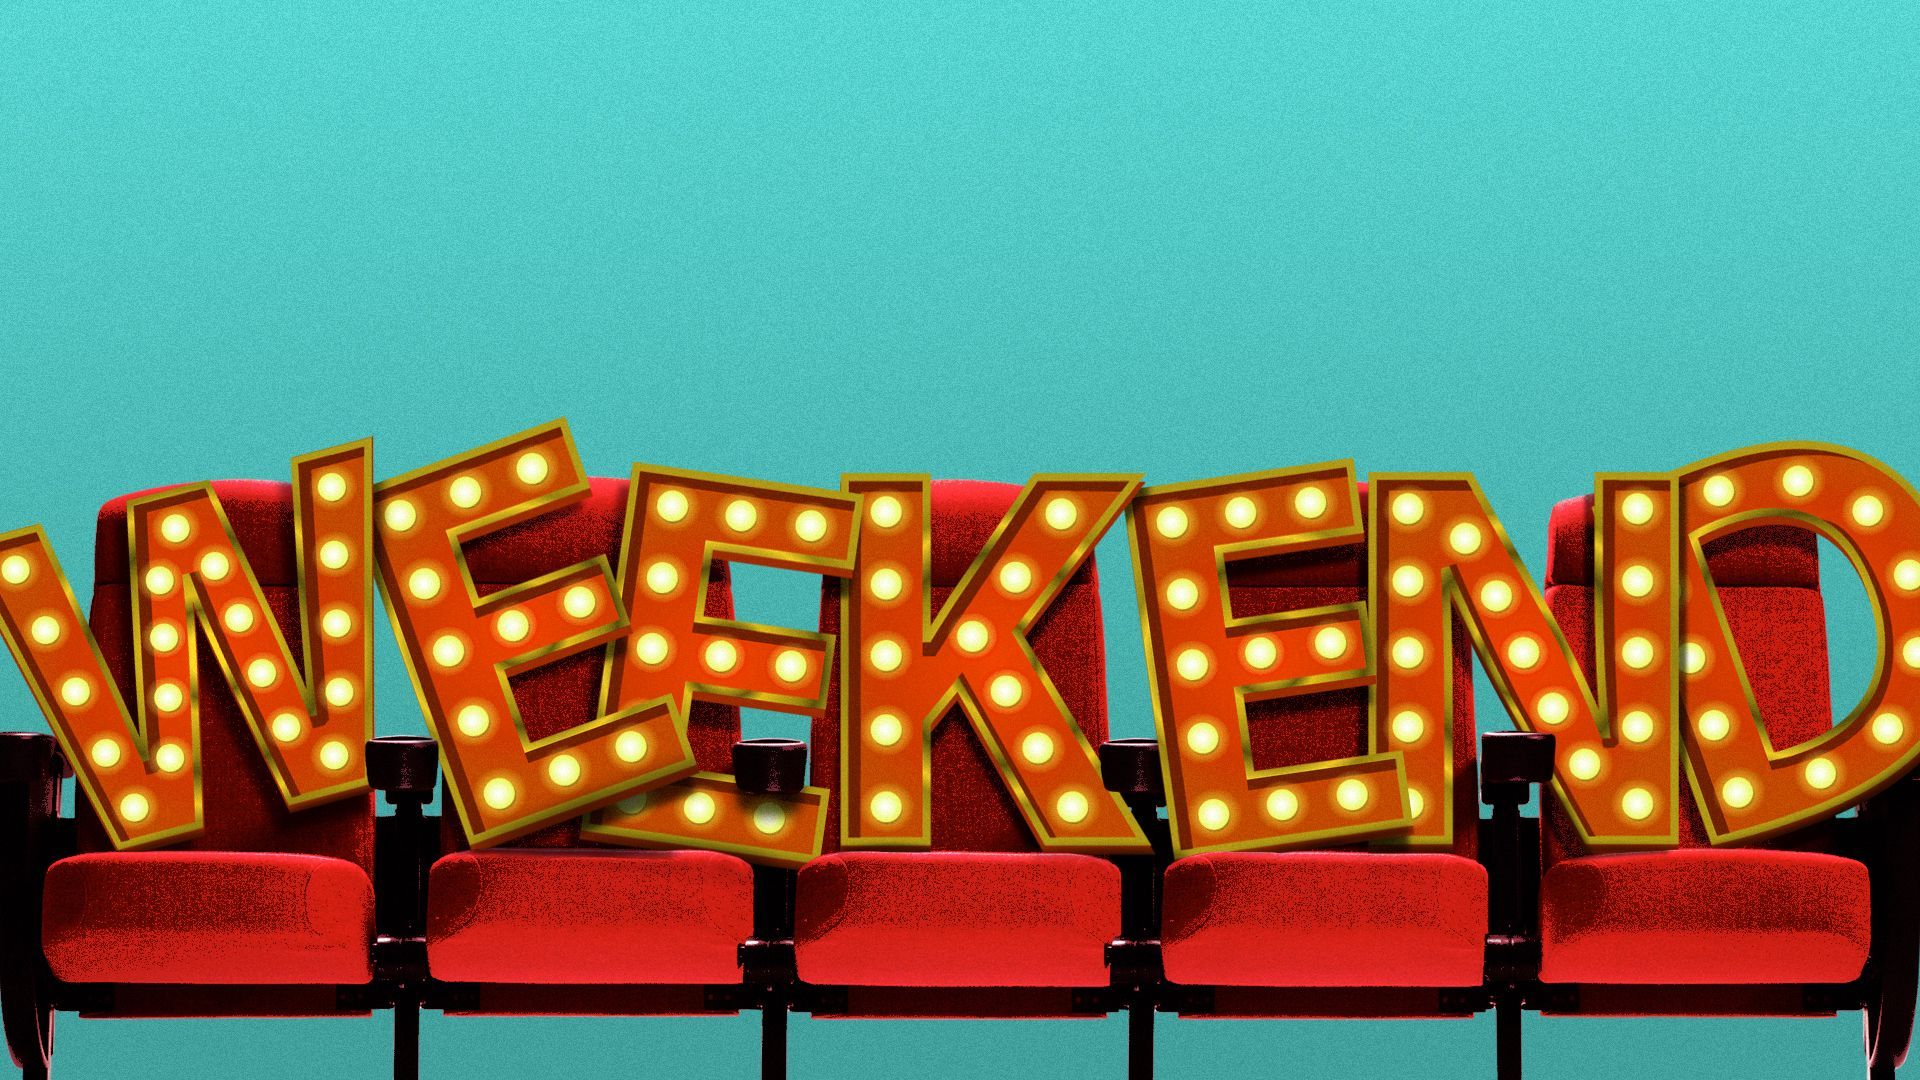 Illustration of lit marquee letters spelling "WEEKEND" sitting in a row of theater seats.